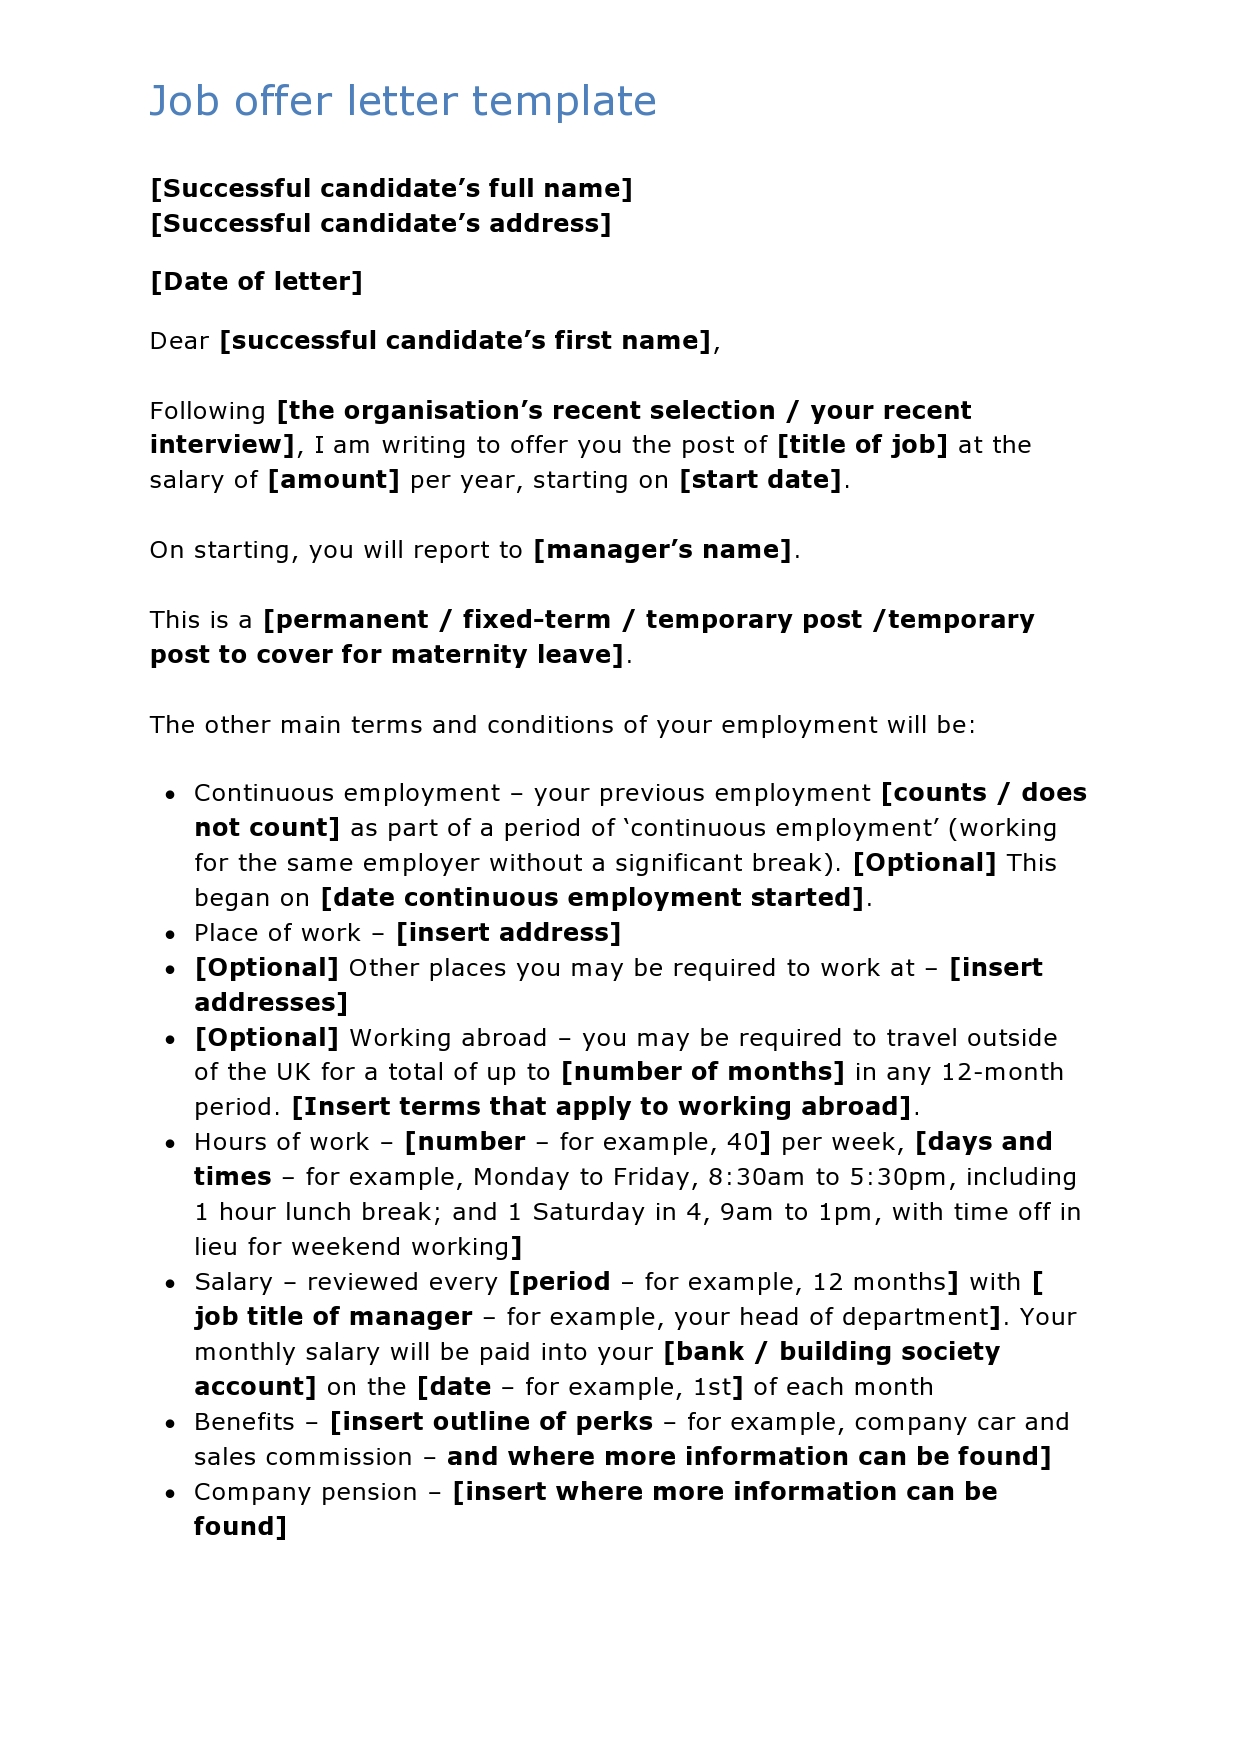 Free employment offer letter template 08